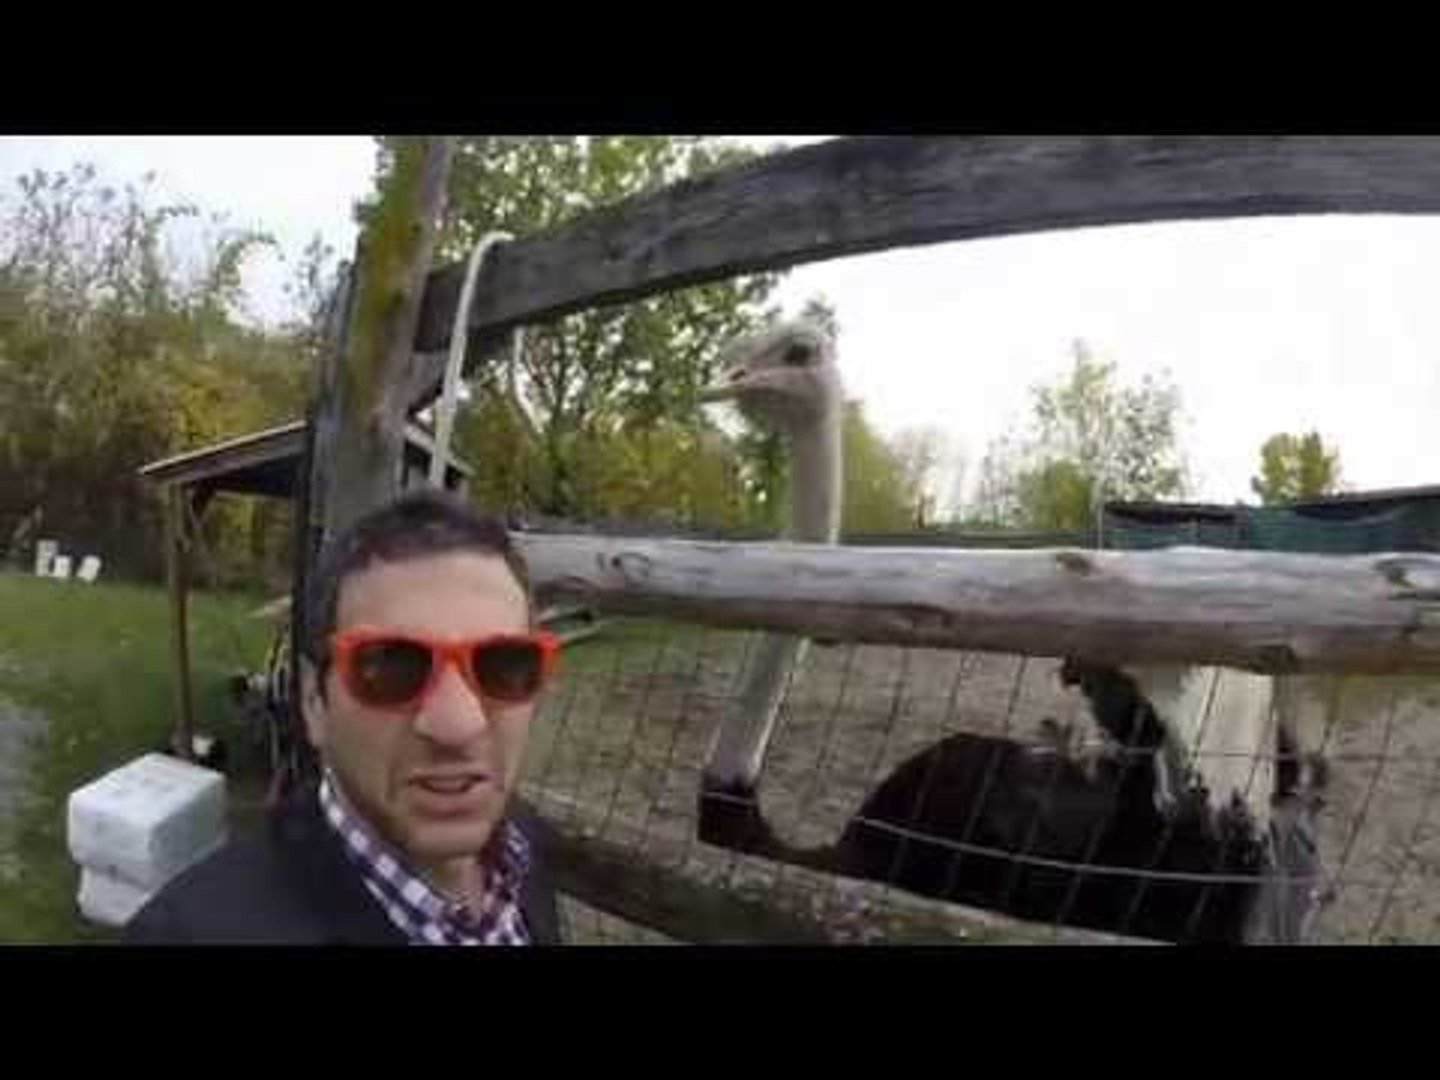 Man Visits Ostrich Farm for a Special Reason